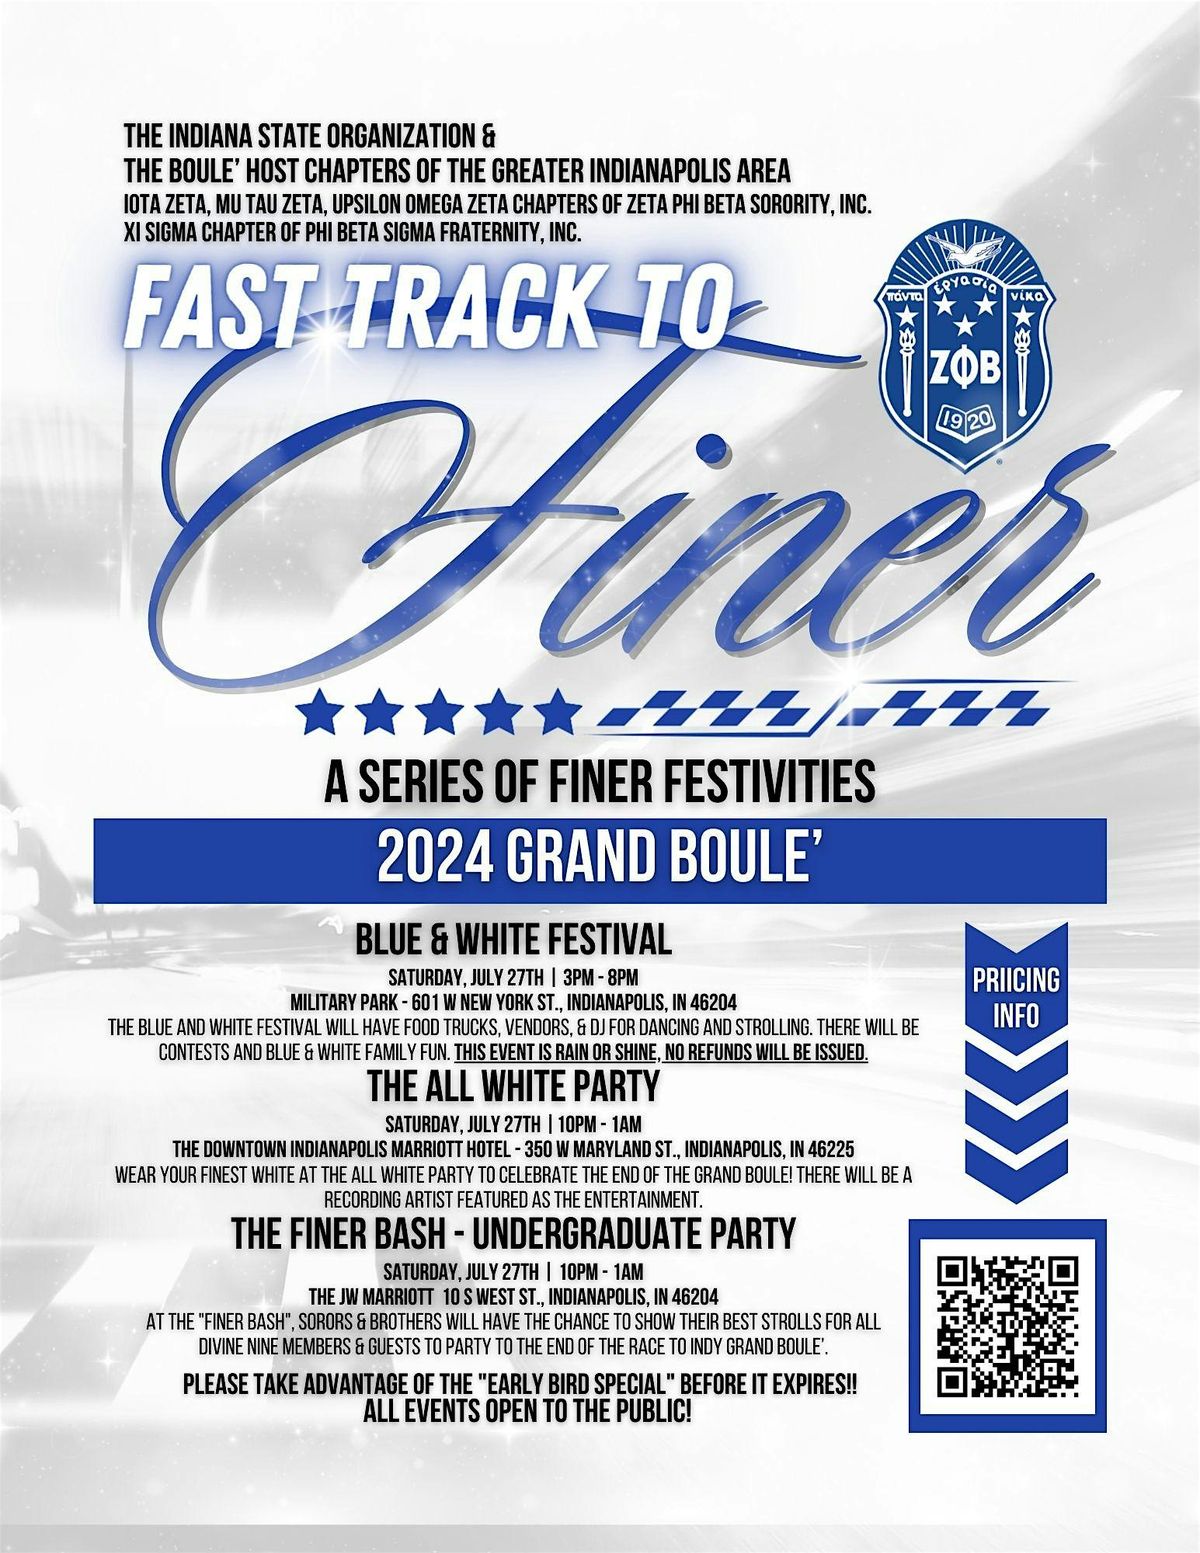 Fast Track to Finer "A Series of Finer Festivities"